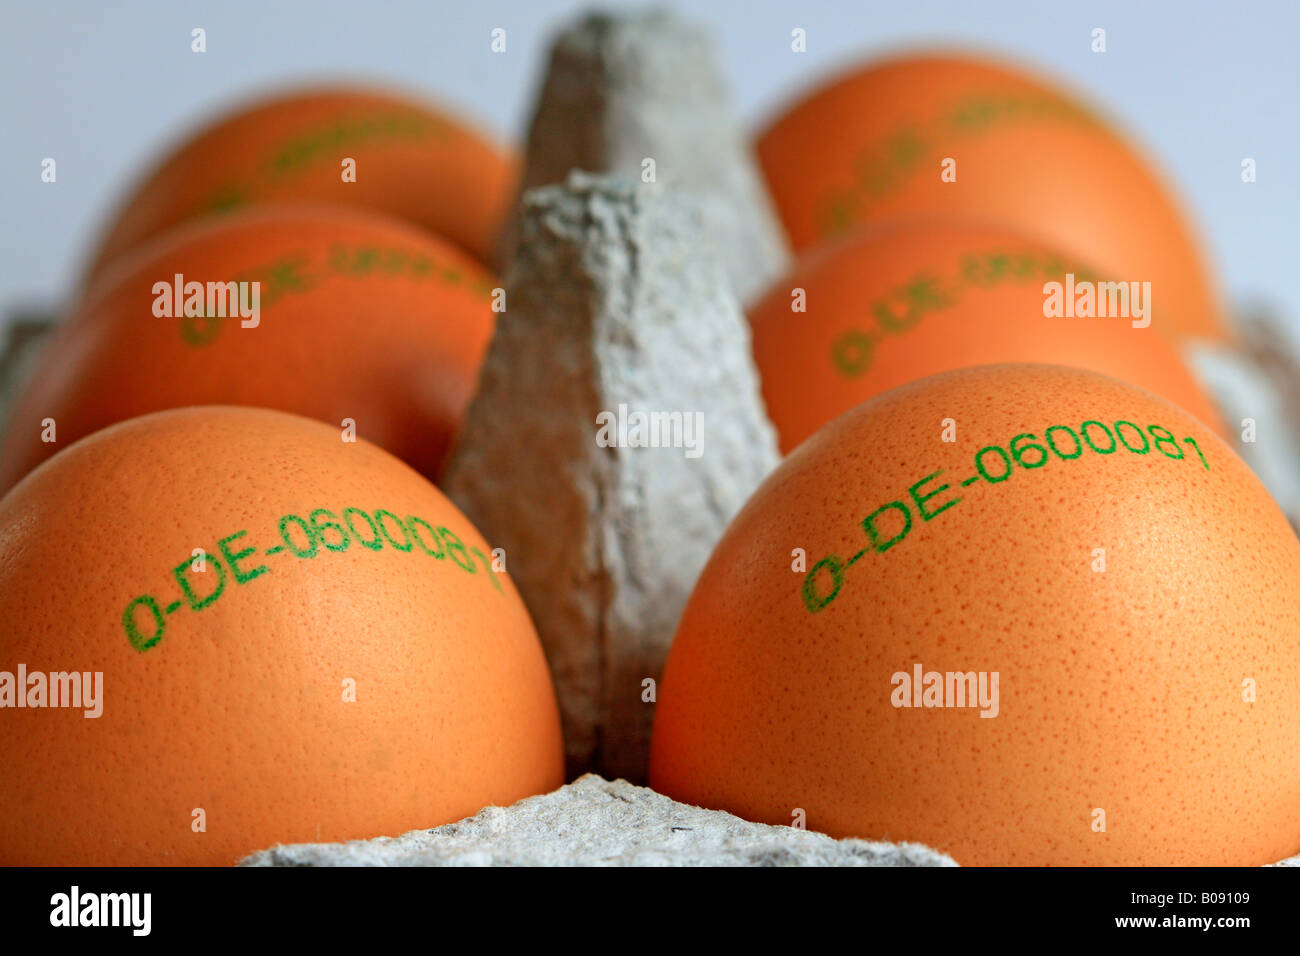 Organic brown eggs with stamp of origin in an egg carton, country of origin: Germany Stock Photo